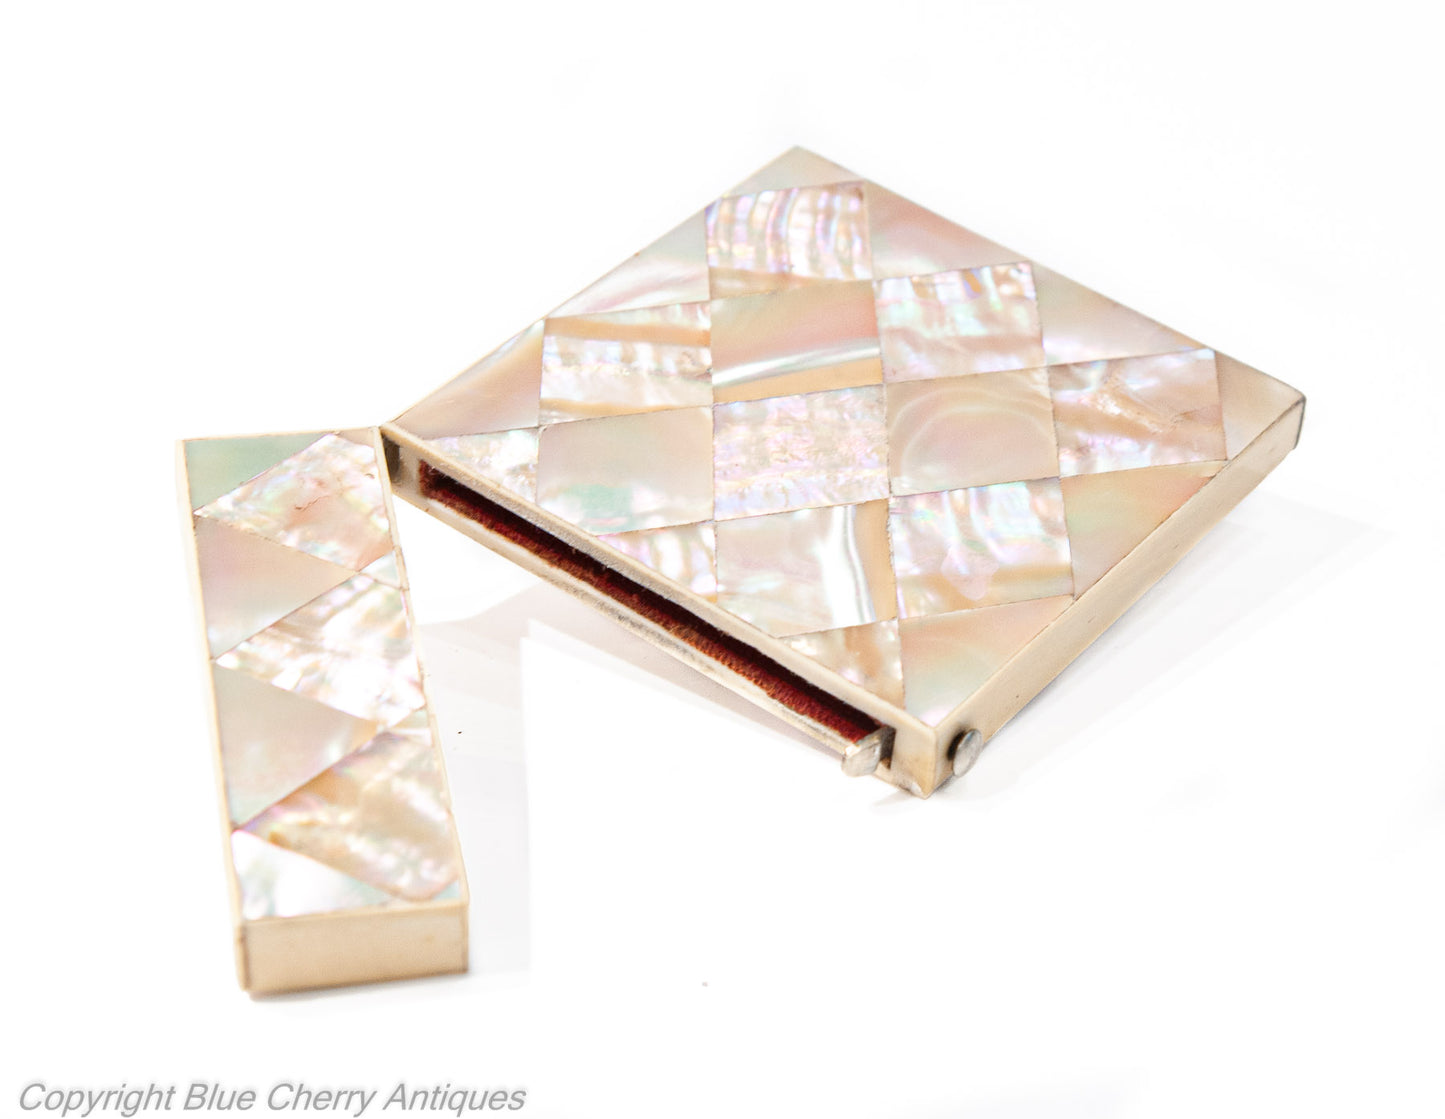 Mother of Pearl Iridescent Victorian Calling Card Case - Antique c1870 (Code 1927)